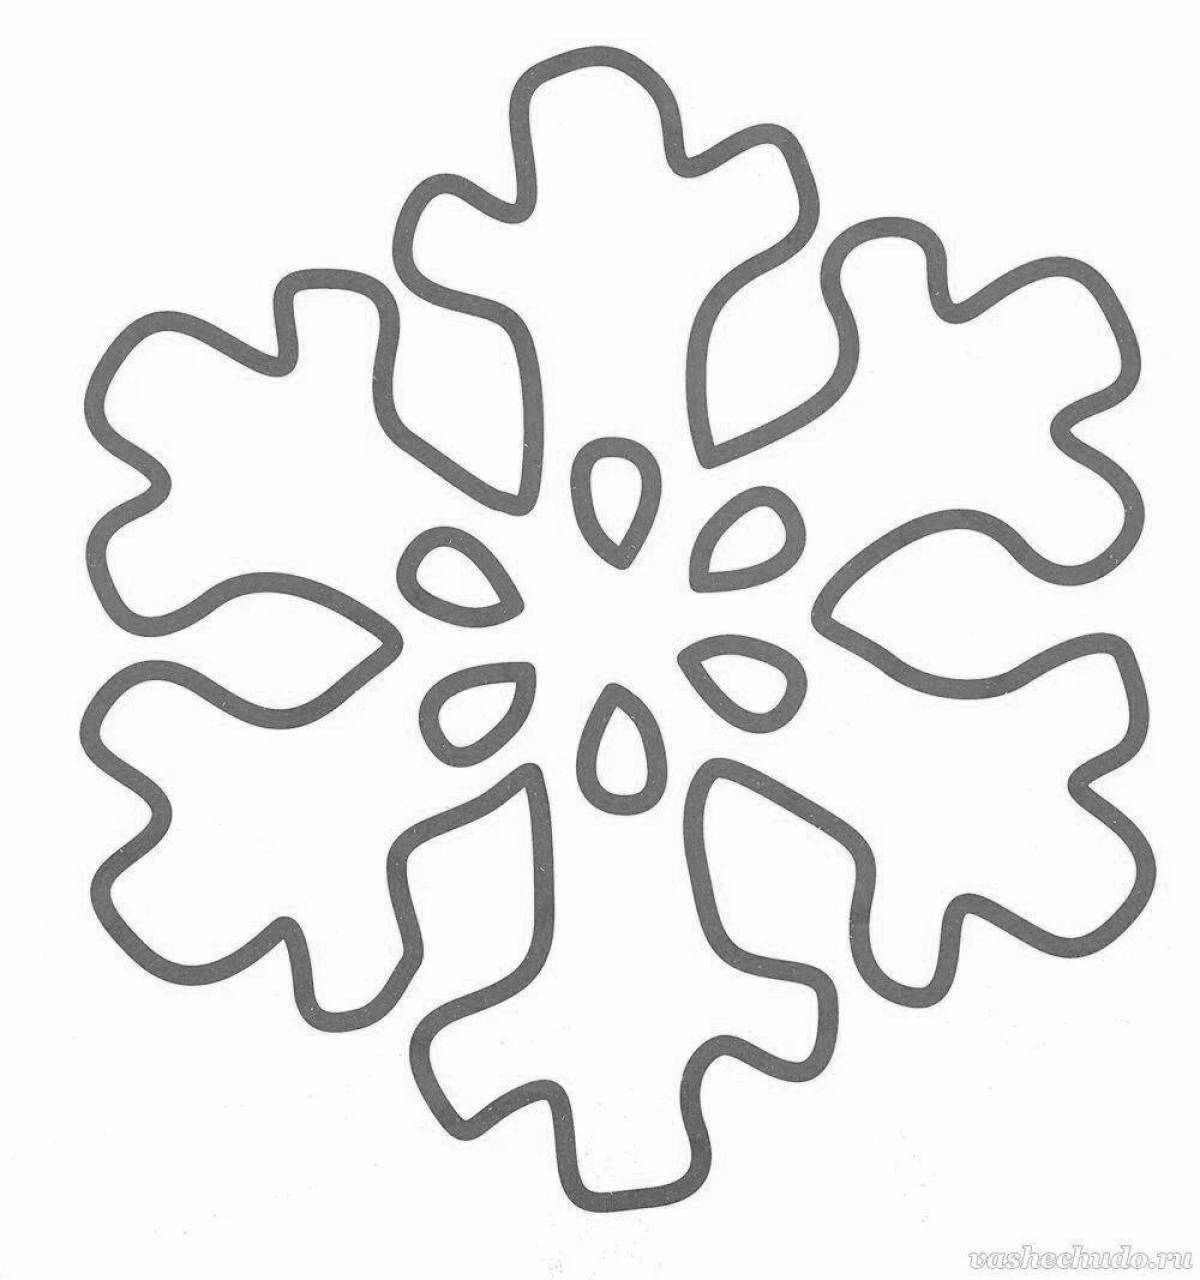 Adorable snowflake coloring book for kids 3-4 years old